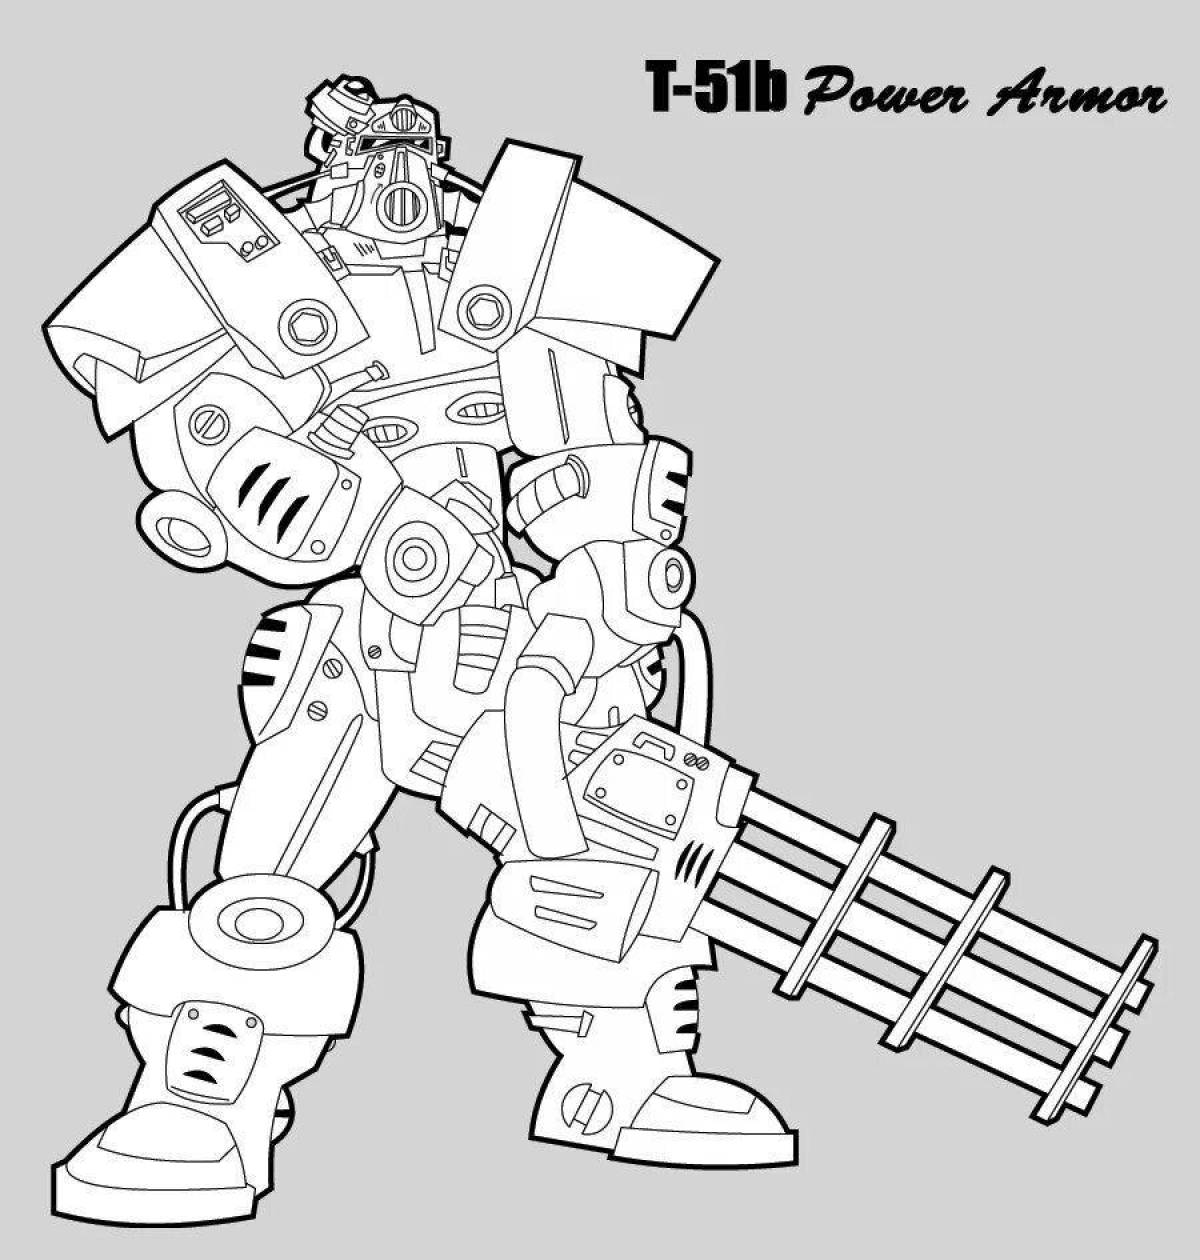 Sublime power armor fallout 4 coloring page